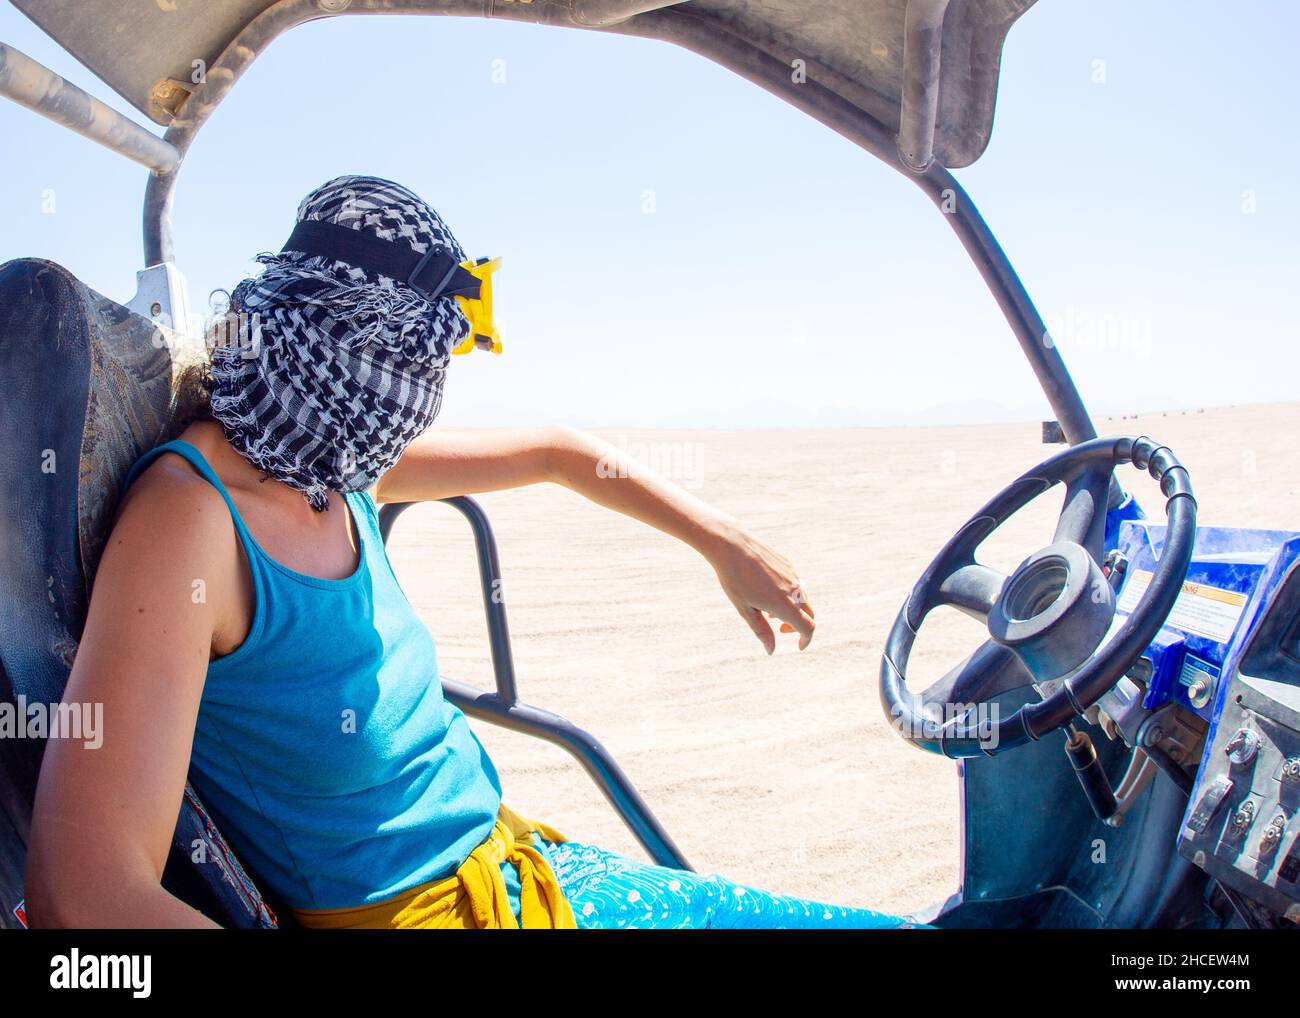 Atv tourists in egypt hurgada having fun before the sun goes down on a hot sand Stock Photo